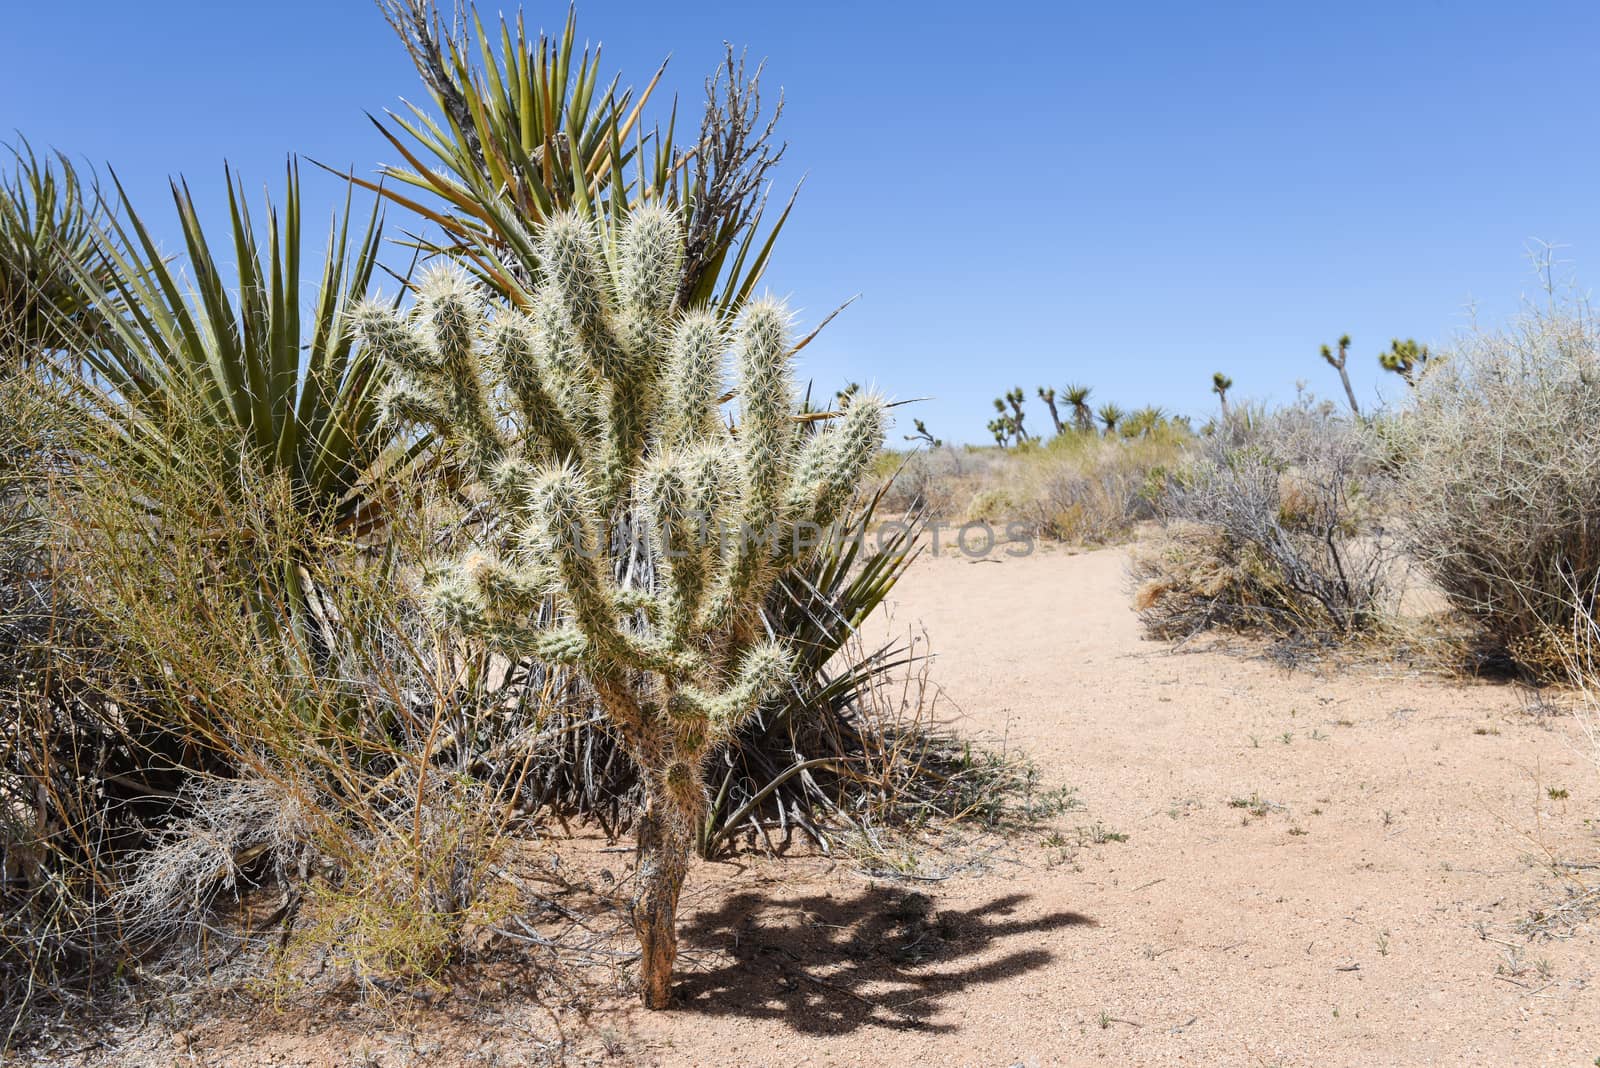 Cactus along Boy Scout Trail in Joshua Tree National Park, California